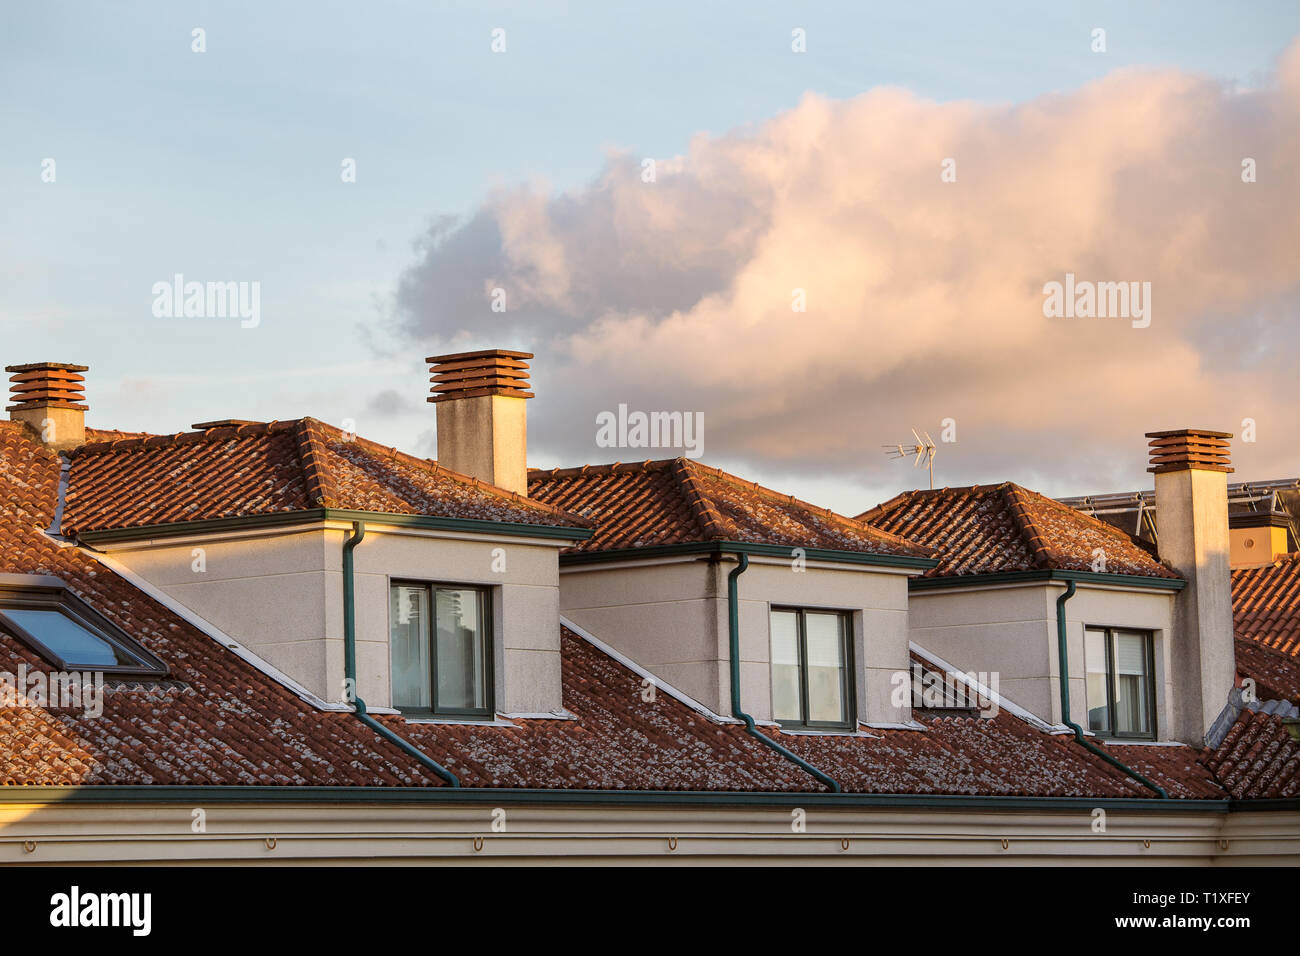 View of of generic Apartment Building With Dormer Windows and clay roof tiles at sunset Stock Photo